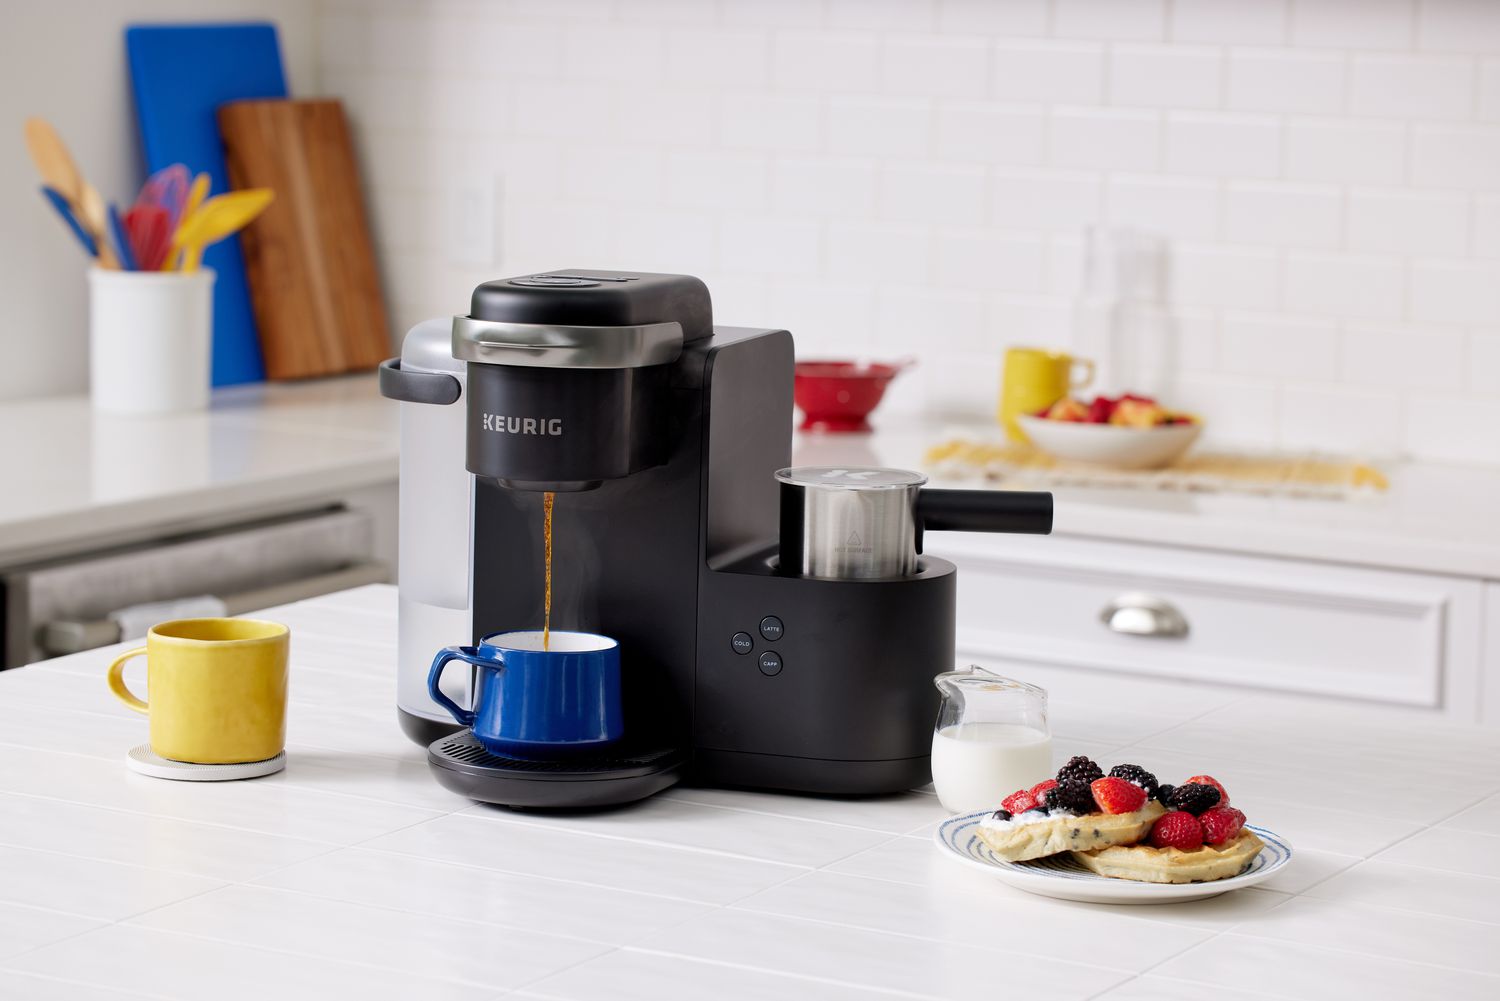 Keurig K-Café Single-Serve K-Cup Coffee Maker pouring coffee into a cup next to a plate of pancakes